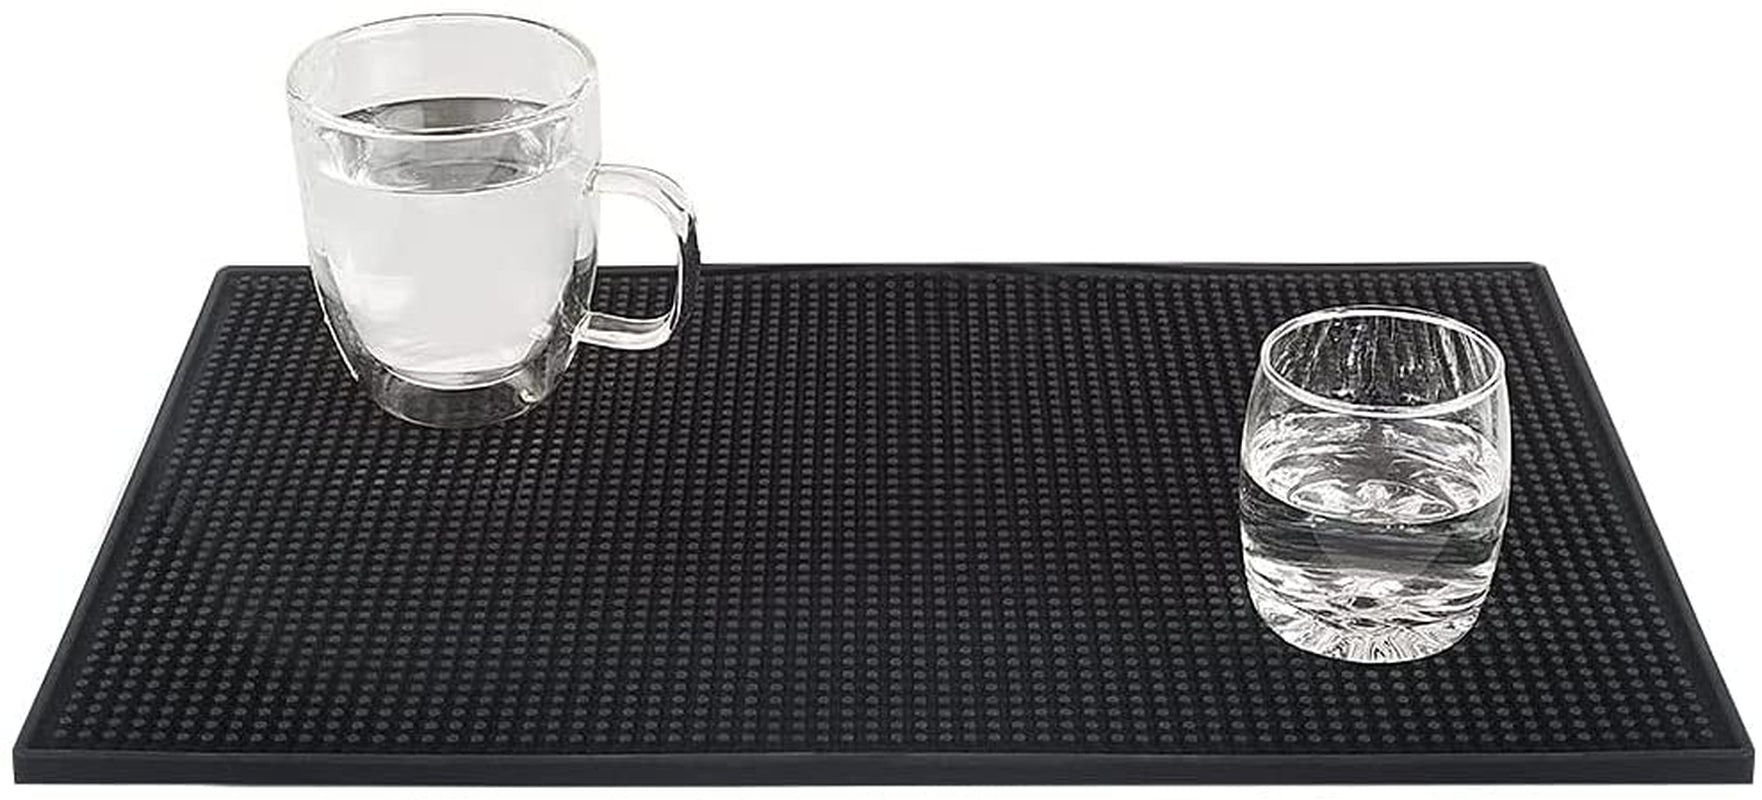 2 Pack Rubber Bar Mat 18 X 12, Thick Durable and Stylish Black Bar Spill Mat. Non Slip, Non-Toxic, Service Mat for Coffee, Bars, Restaurants Counter Top